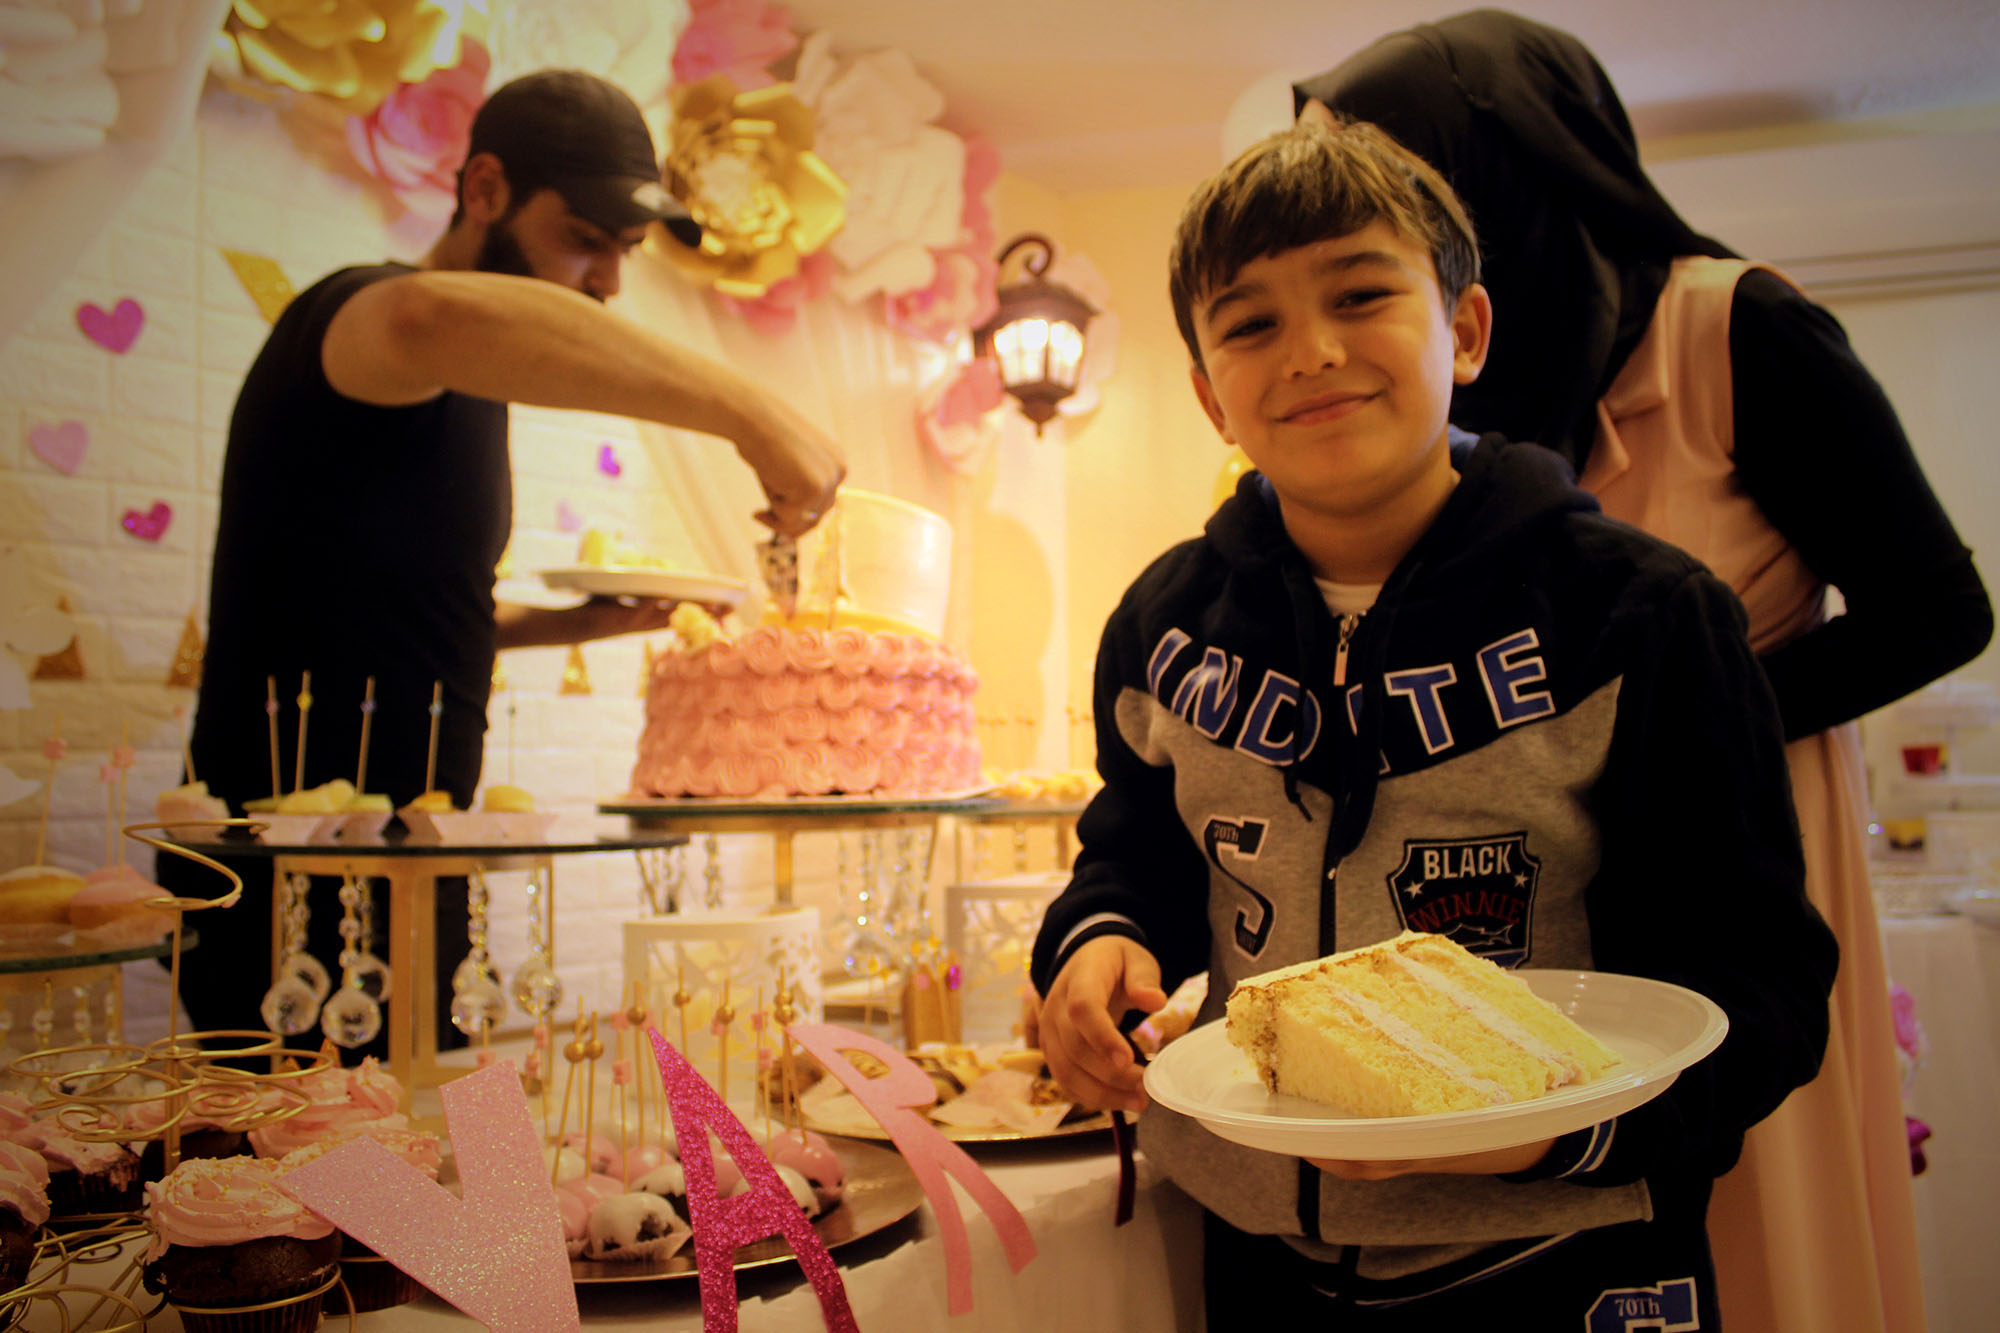 A boy shows off a cake made by the event planning team.